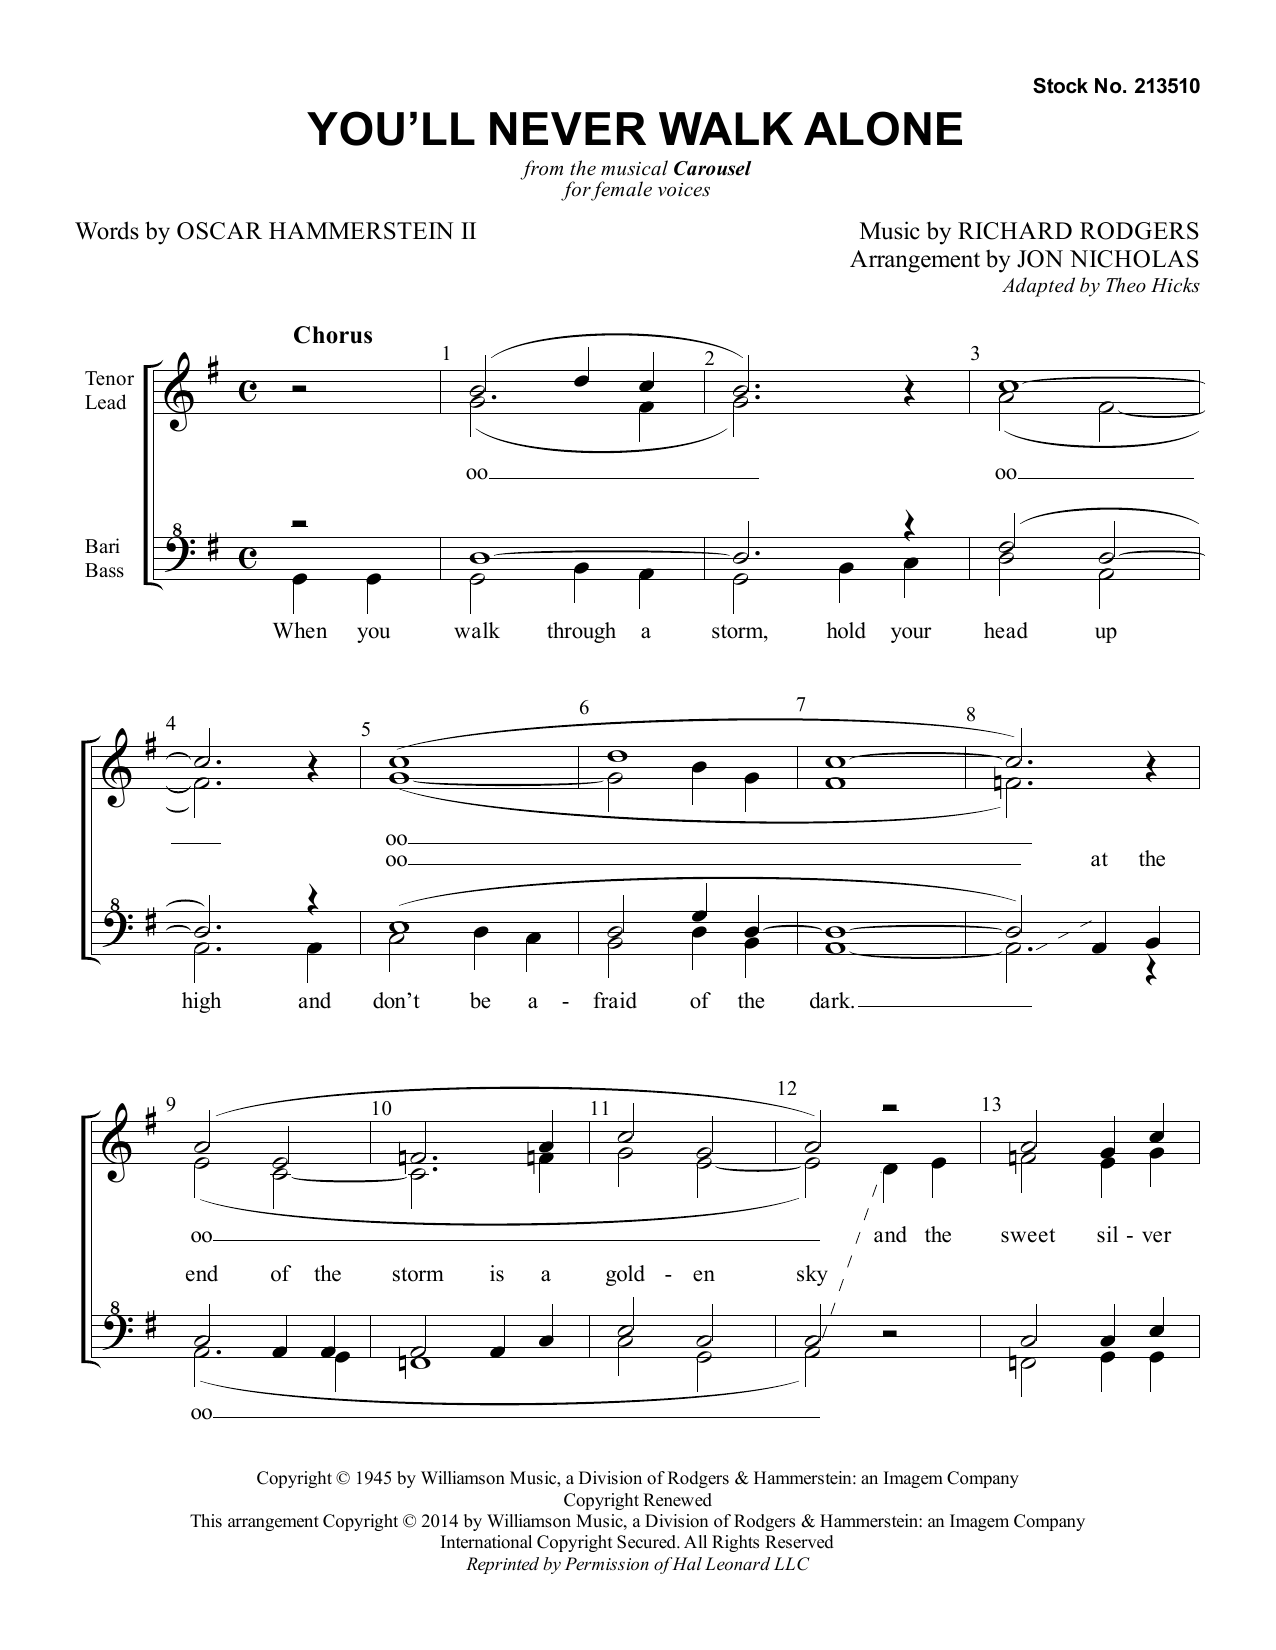 Download Rodgers & Hammerstein You'll Never Walk Alone (from Carousel) Sheet Music